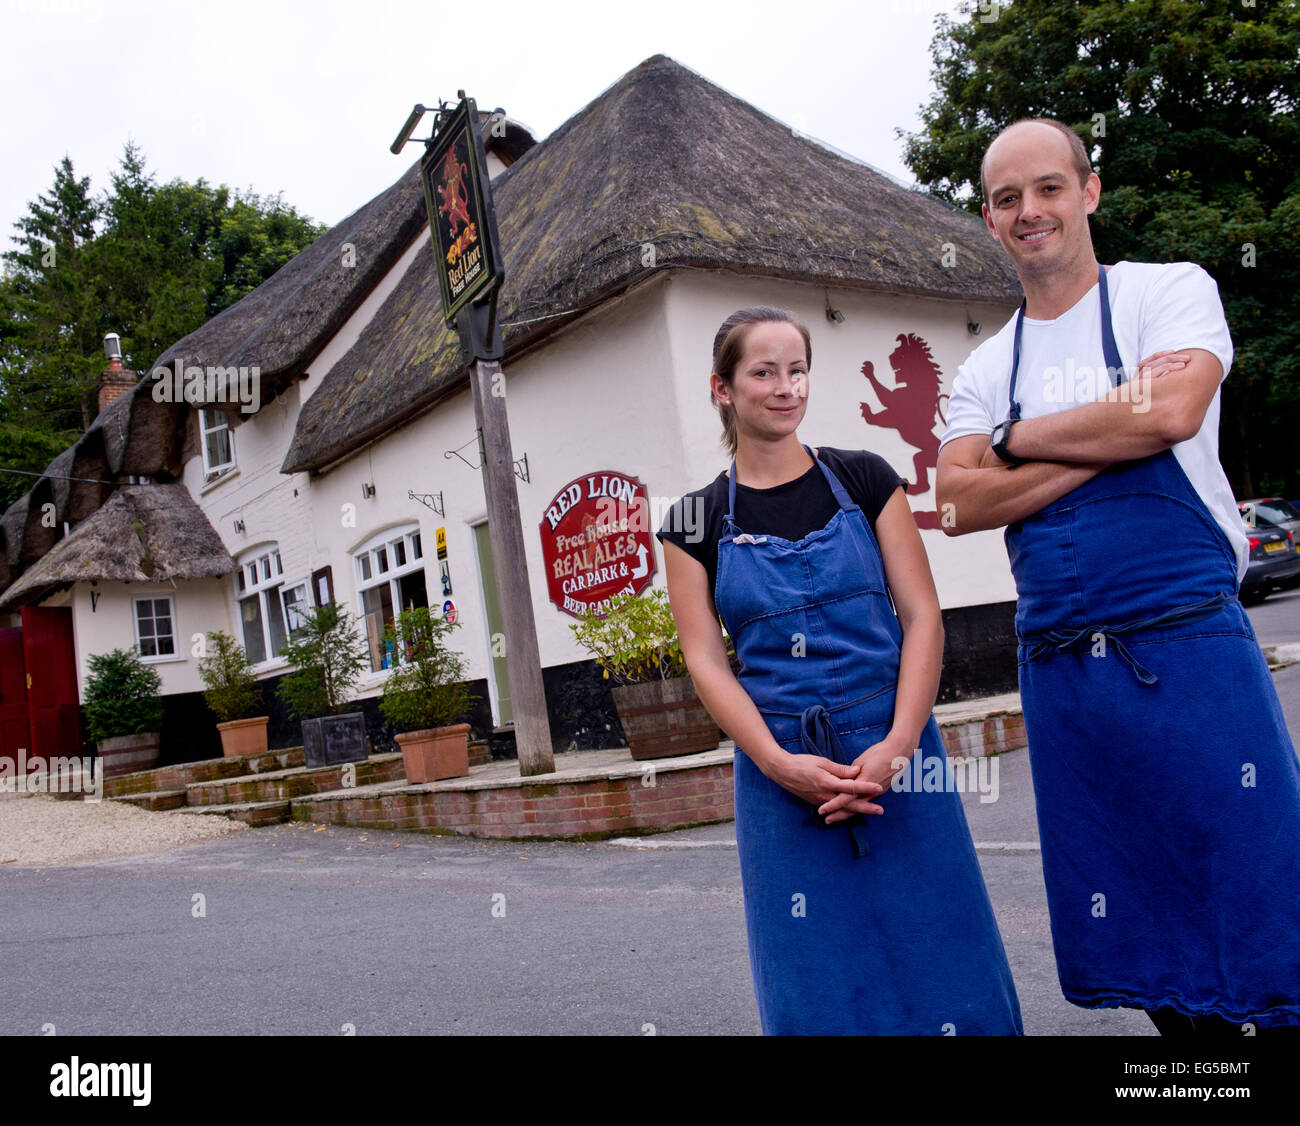 The acclaimed Michelin starred Red Lion Freehouse, East Chisenbury, Pewsey, Wiltshire, SN9 6AQ   Images feature the owners chef Guy Manning and wife Brittany 'Britt' Stock Photo